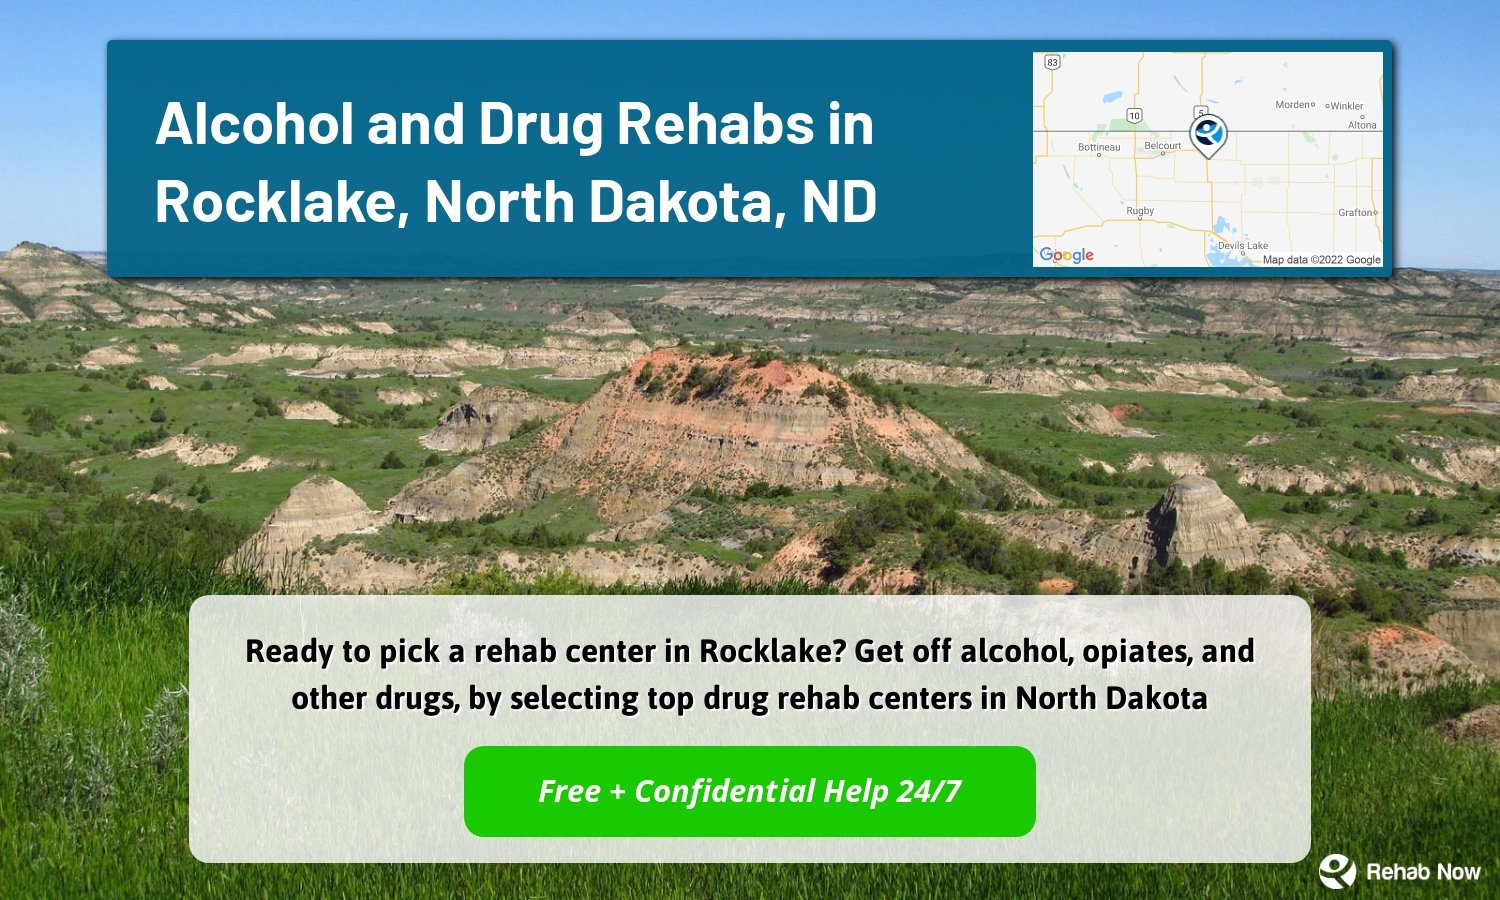 Ready to pick a rehab center in Rocklake? Get off alcohol, opiates, and other drugs, by selecting top drug rehab centers in North Dakota